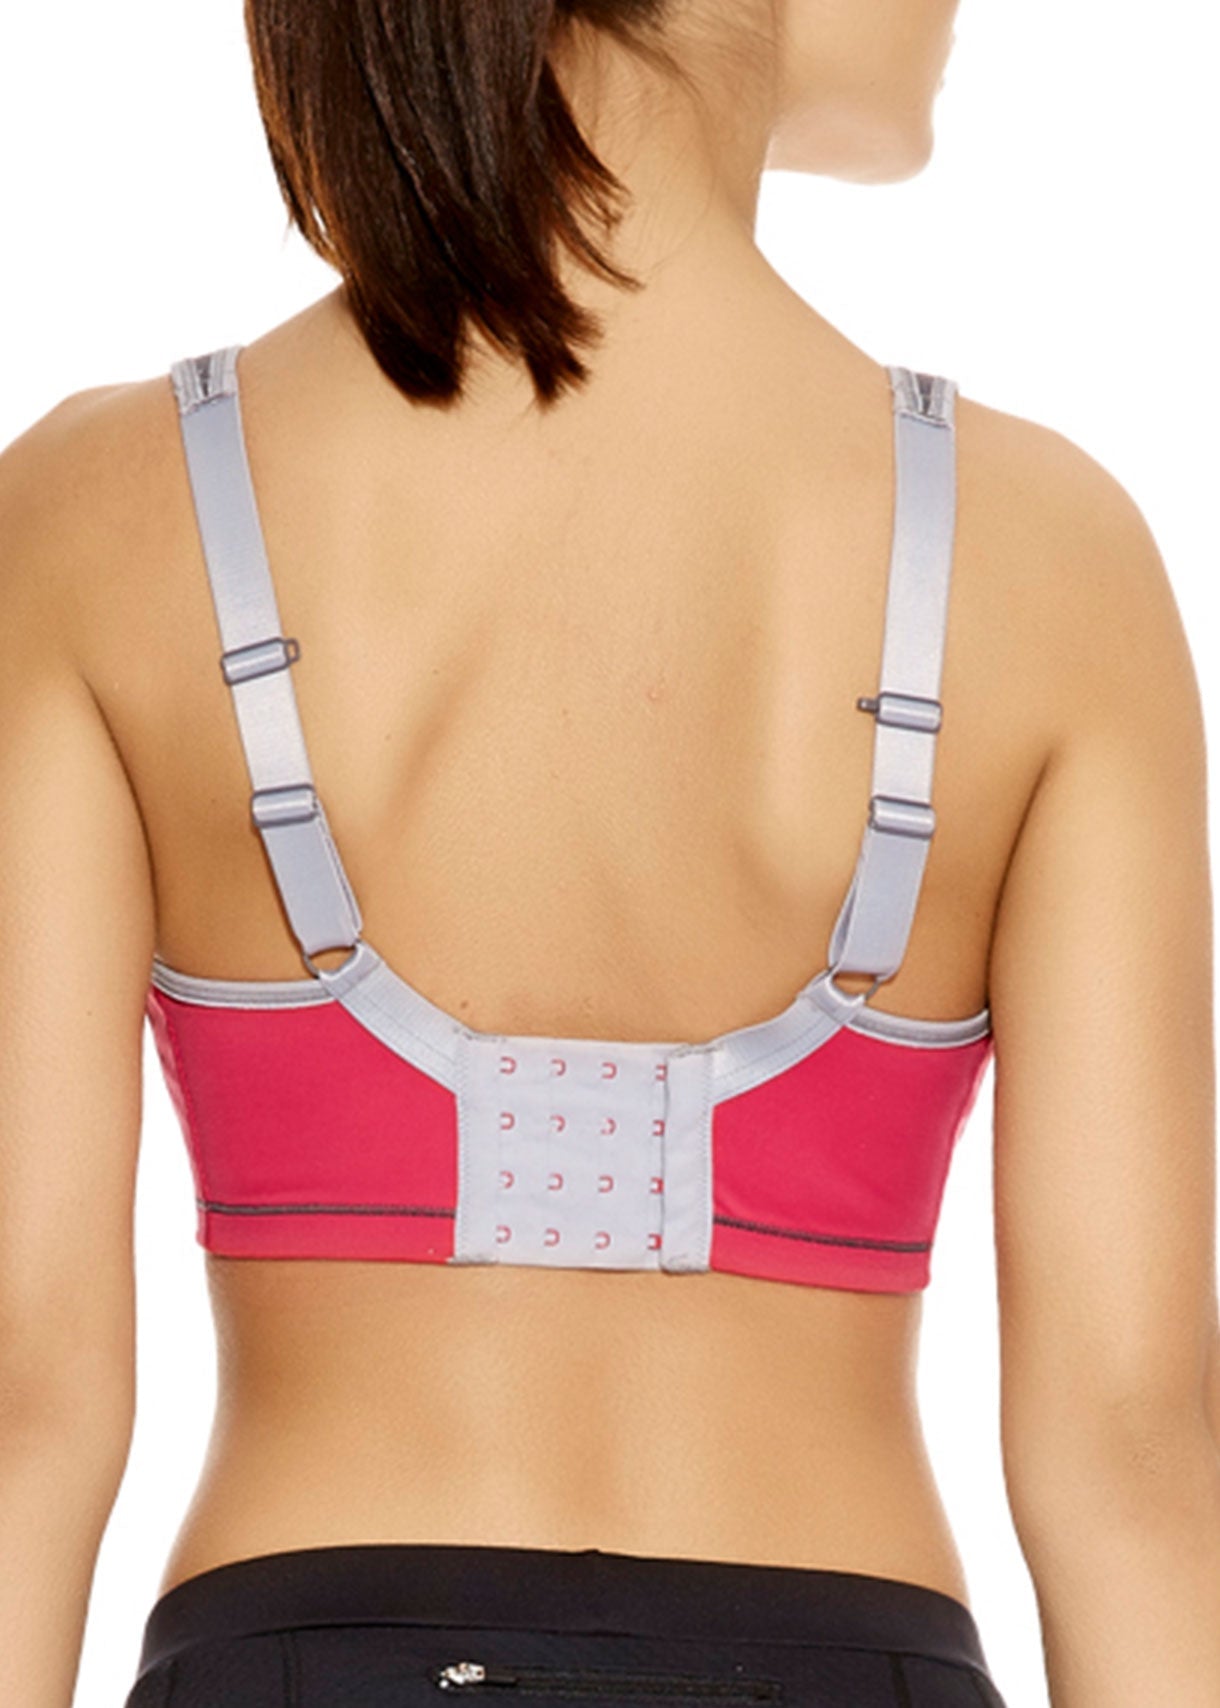 Freya Lingerie Sonic Underwired Sports bra E-H cup –